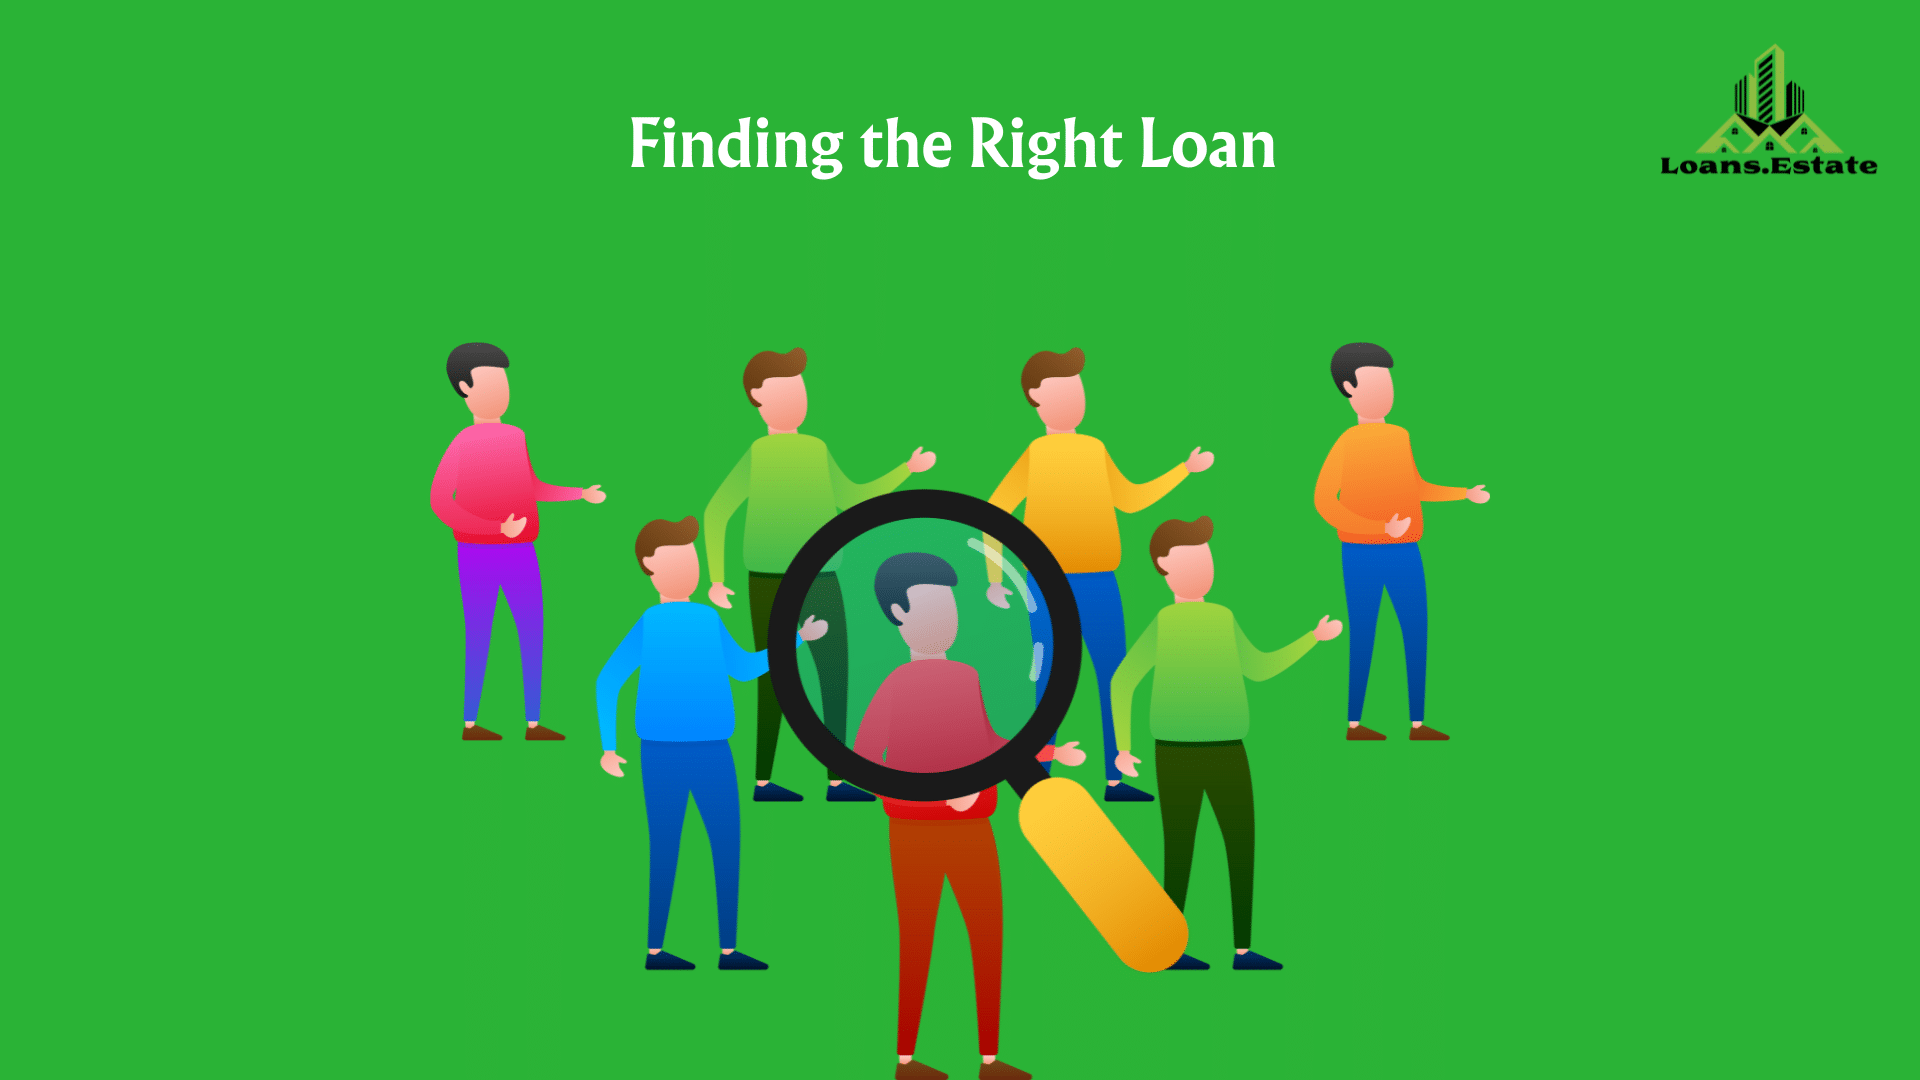 Finding the right loan on loans.estate